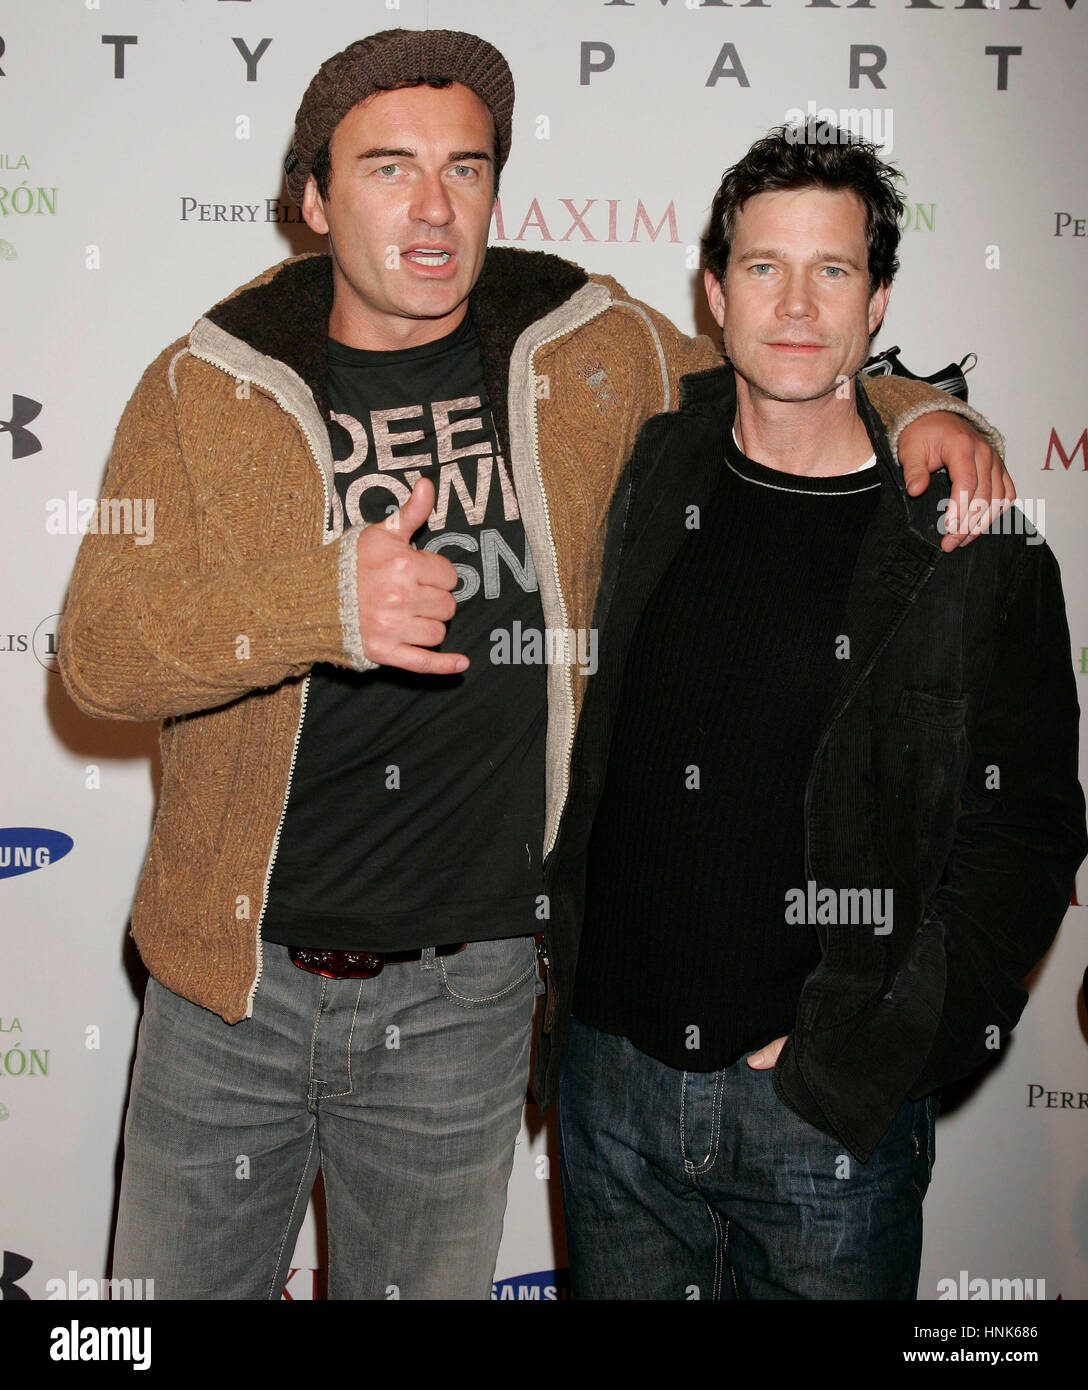 Julian McMahon, left, and Dylan Walsh arrives at the Maxim Super Bowl party at the Stone Rose at the Fairmont Scottsdale Princess in Scottsdale, AZ on Friday, Feb. 1, 2008. Photo by Francis Specker Stock Photo